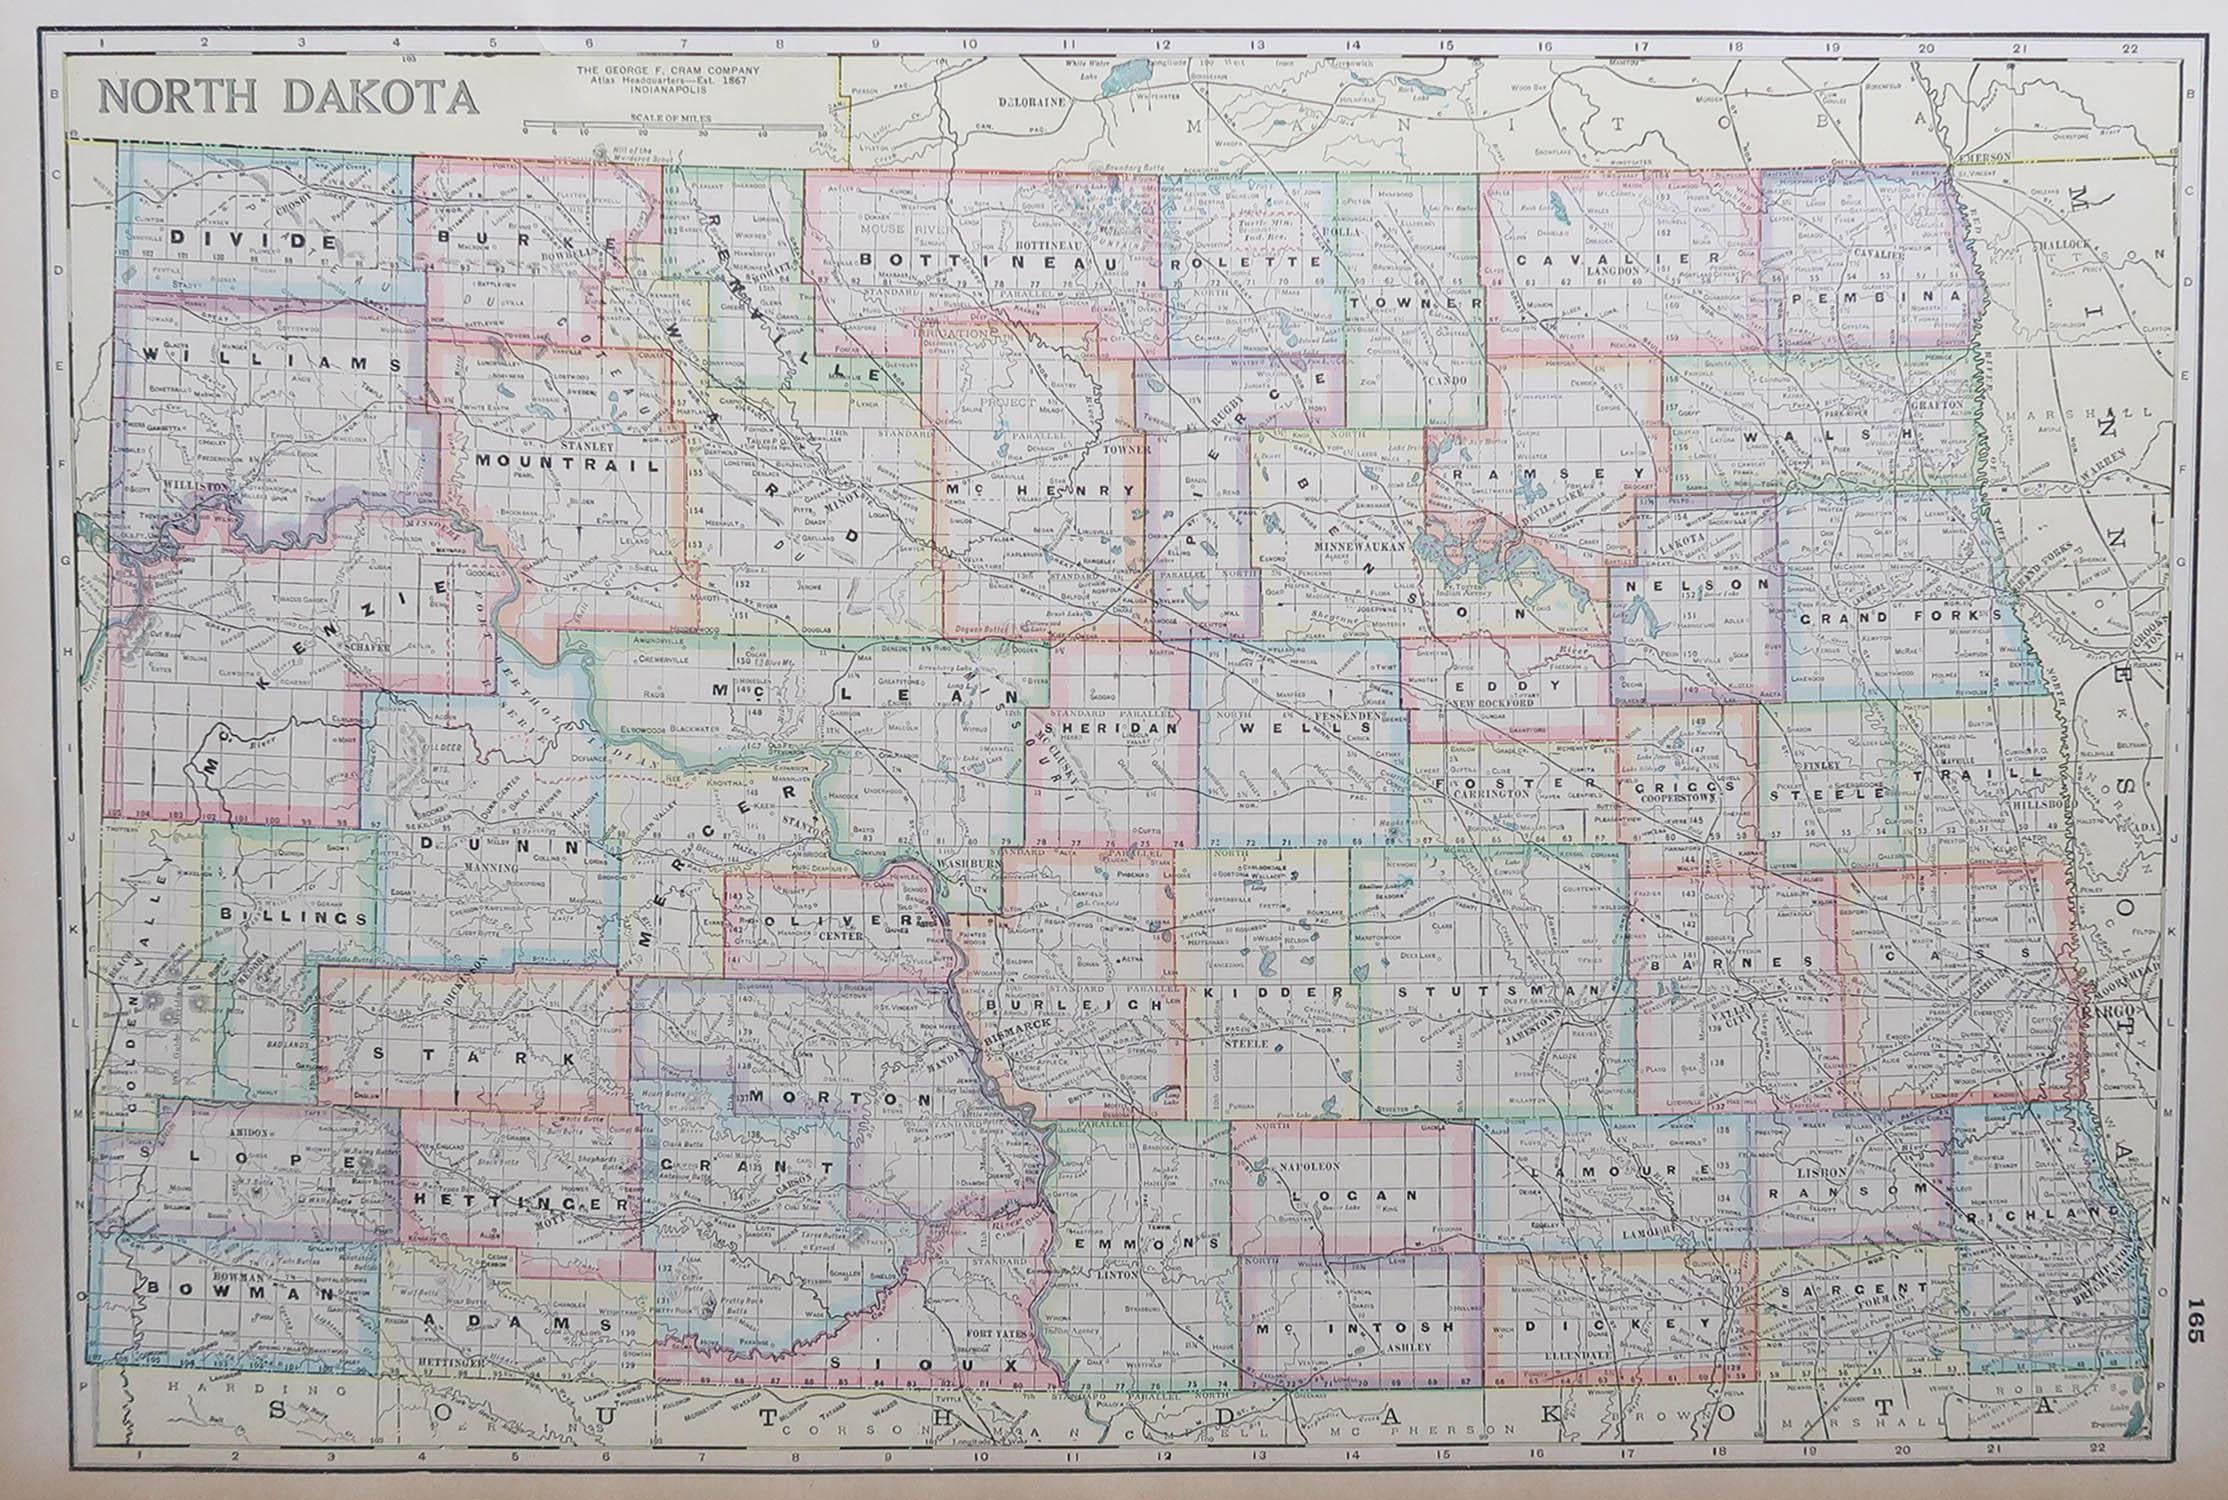 Fabulous map of North Dakota

Original color

Engraved and printed by the George F. Cram Company, Indianapolis.

Published, circa 1900

Unframed

Free shipping.